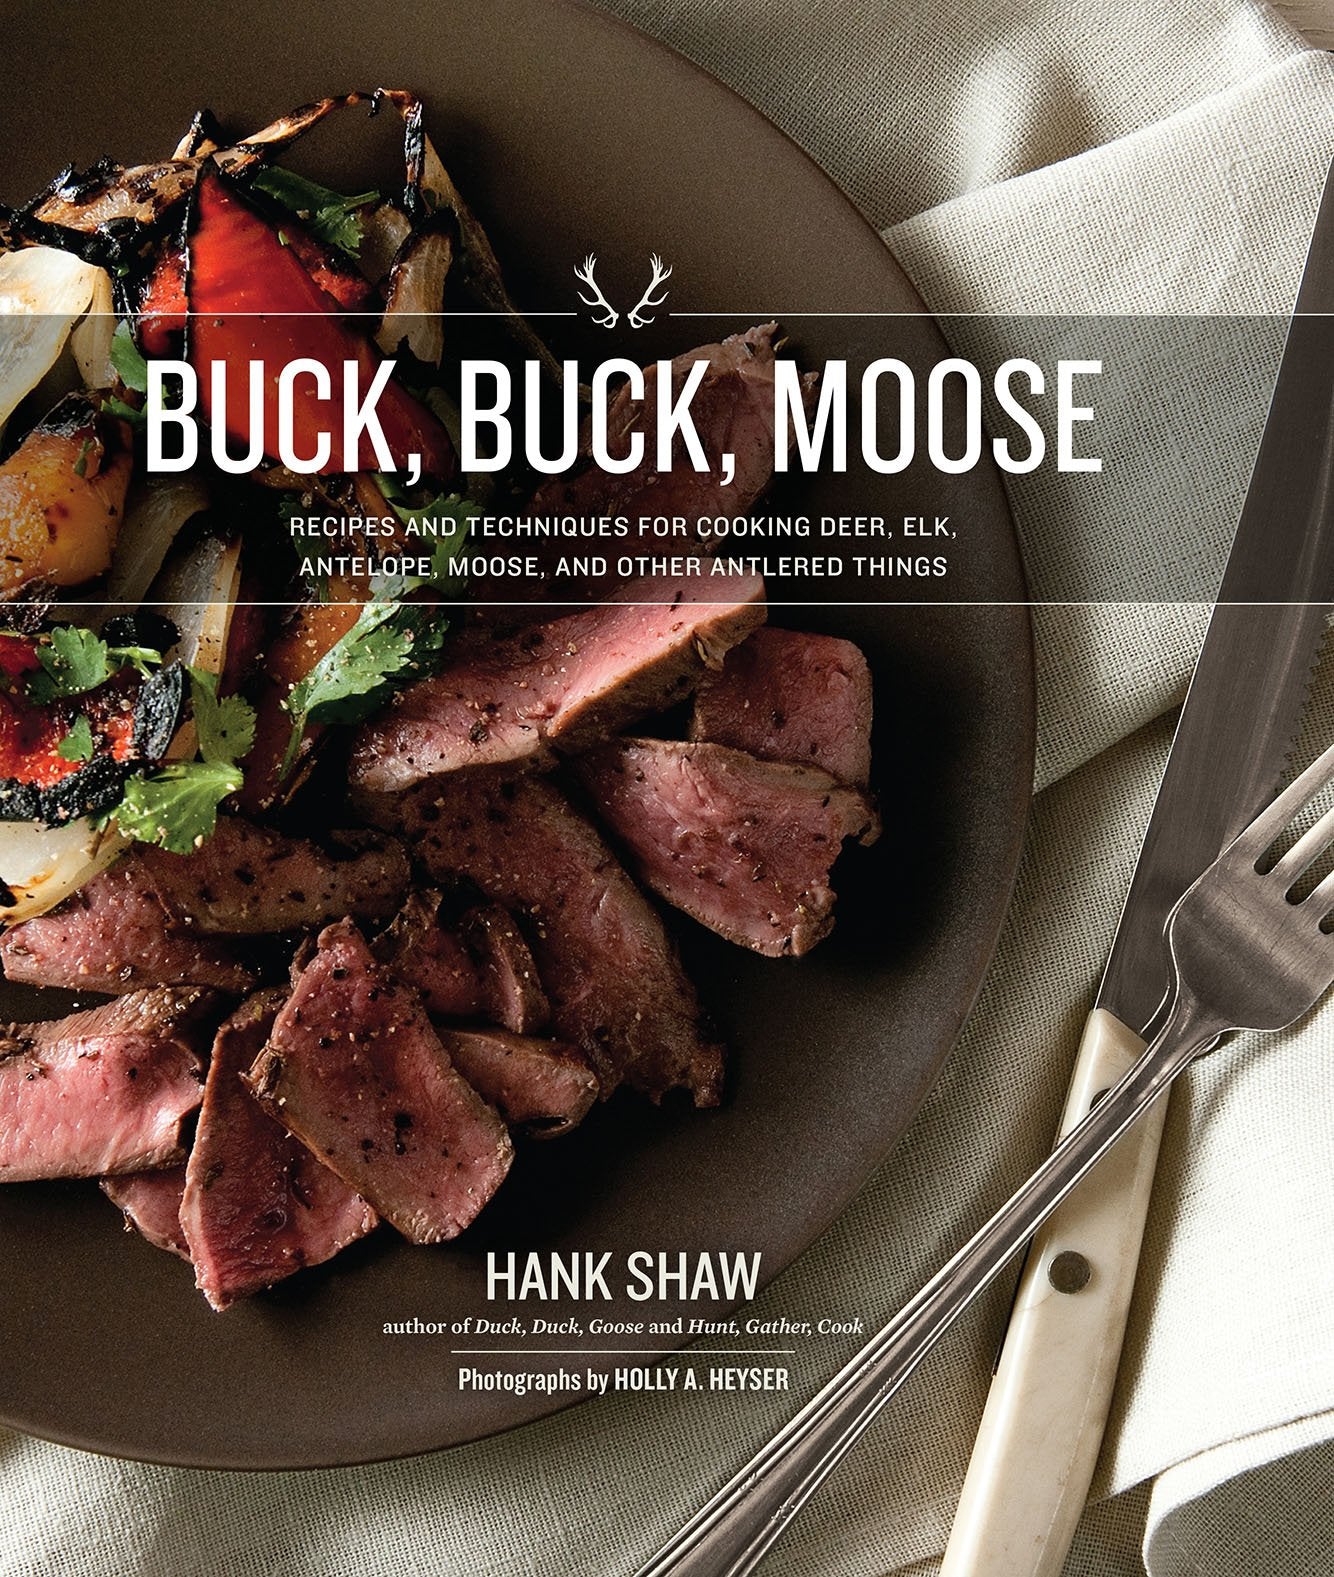 Buck, Buck, Moose: Recipes and Techniques for Cooking Deer, Elk, Moose, Antelope and Other Antlered Things (Hank Shaw)